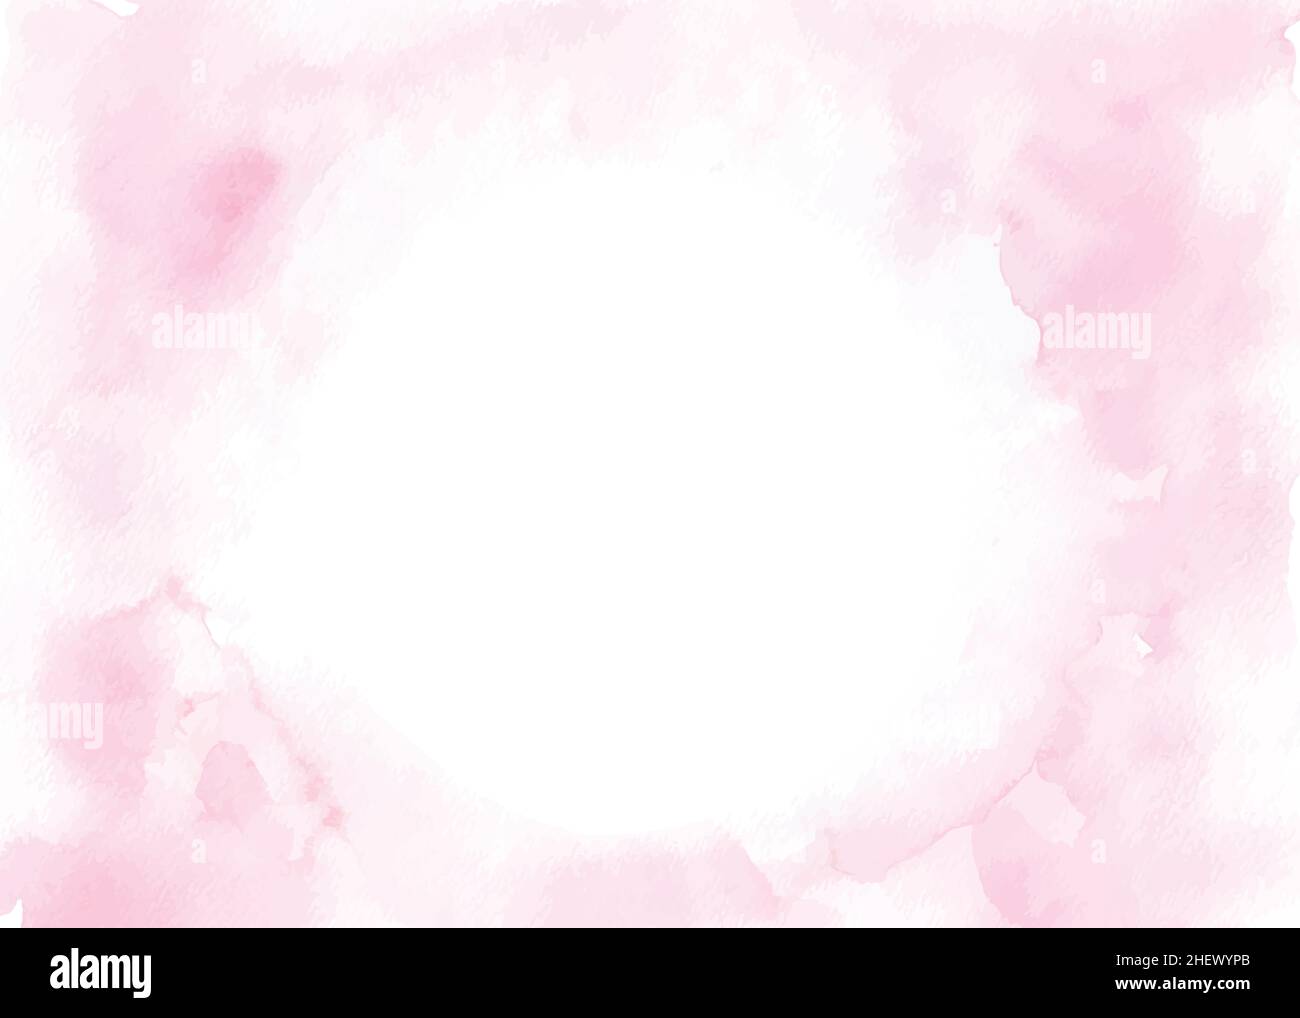 Abstract pink watercolor texture for background. Hand-painted watercolor stains artistic vector used as being an element in the decorative design of h Stock Vector